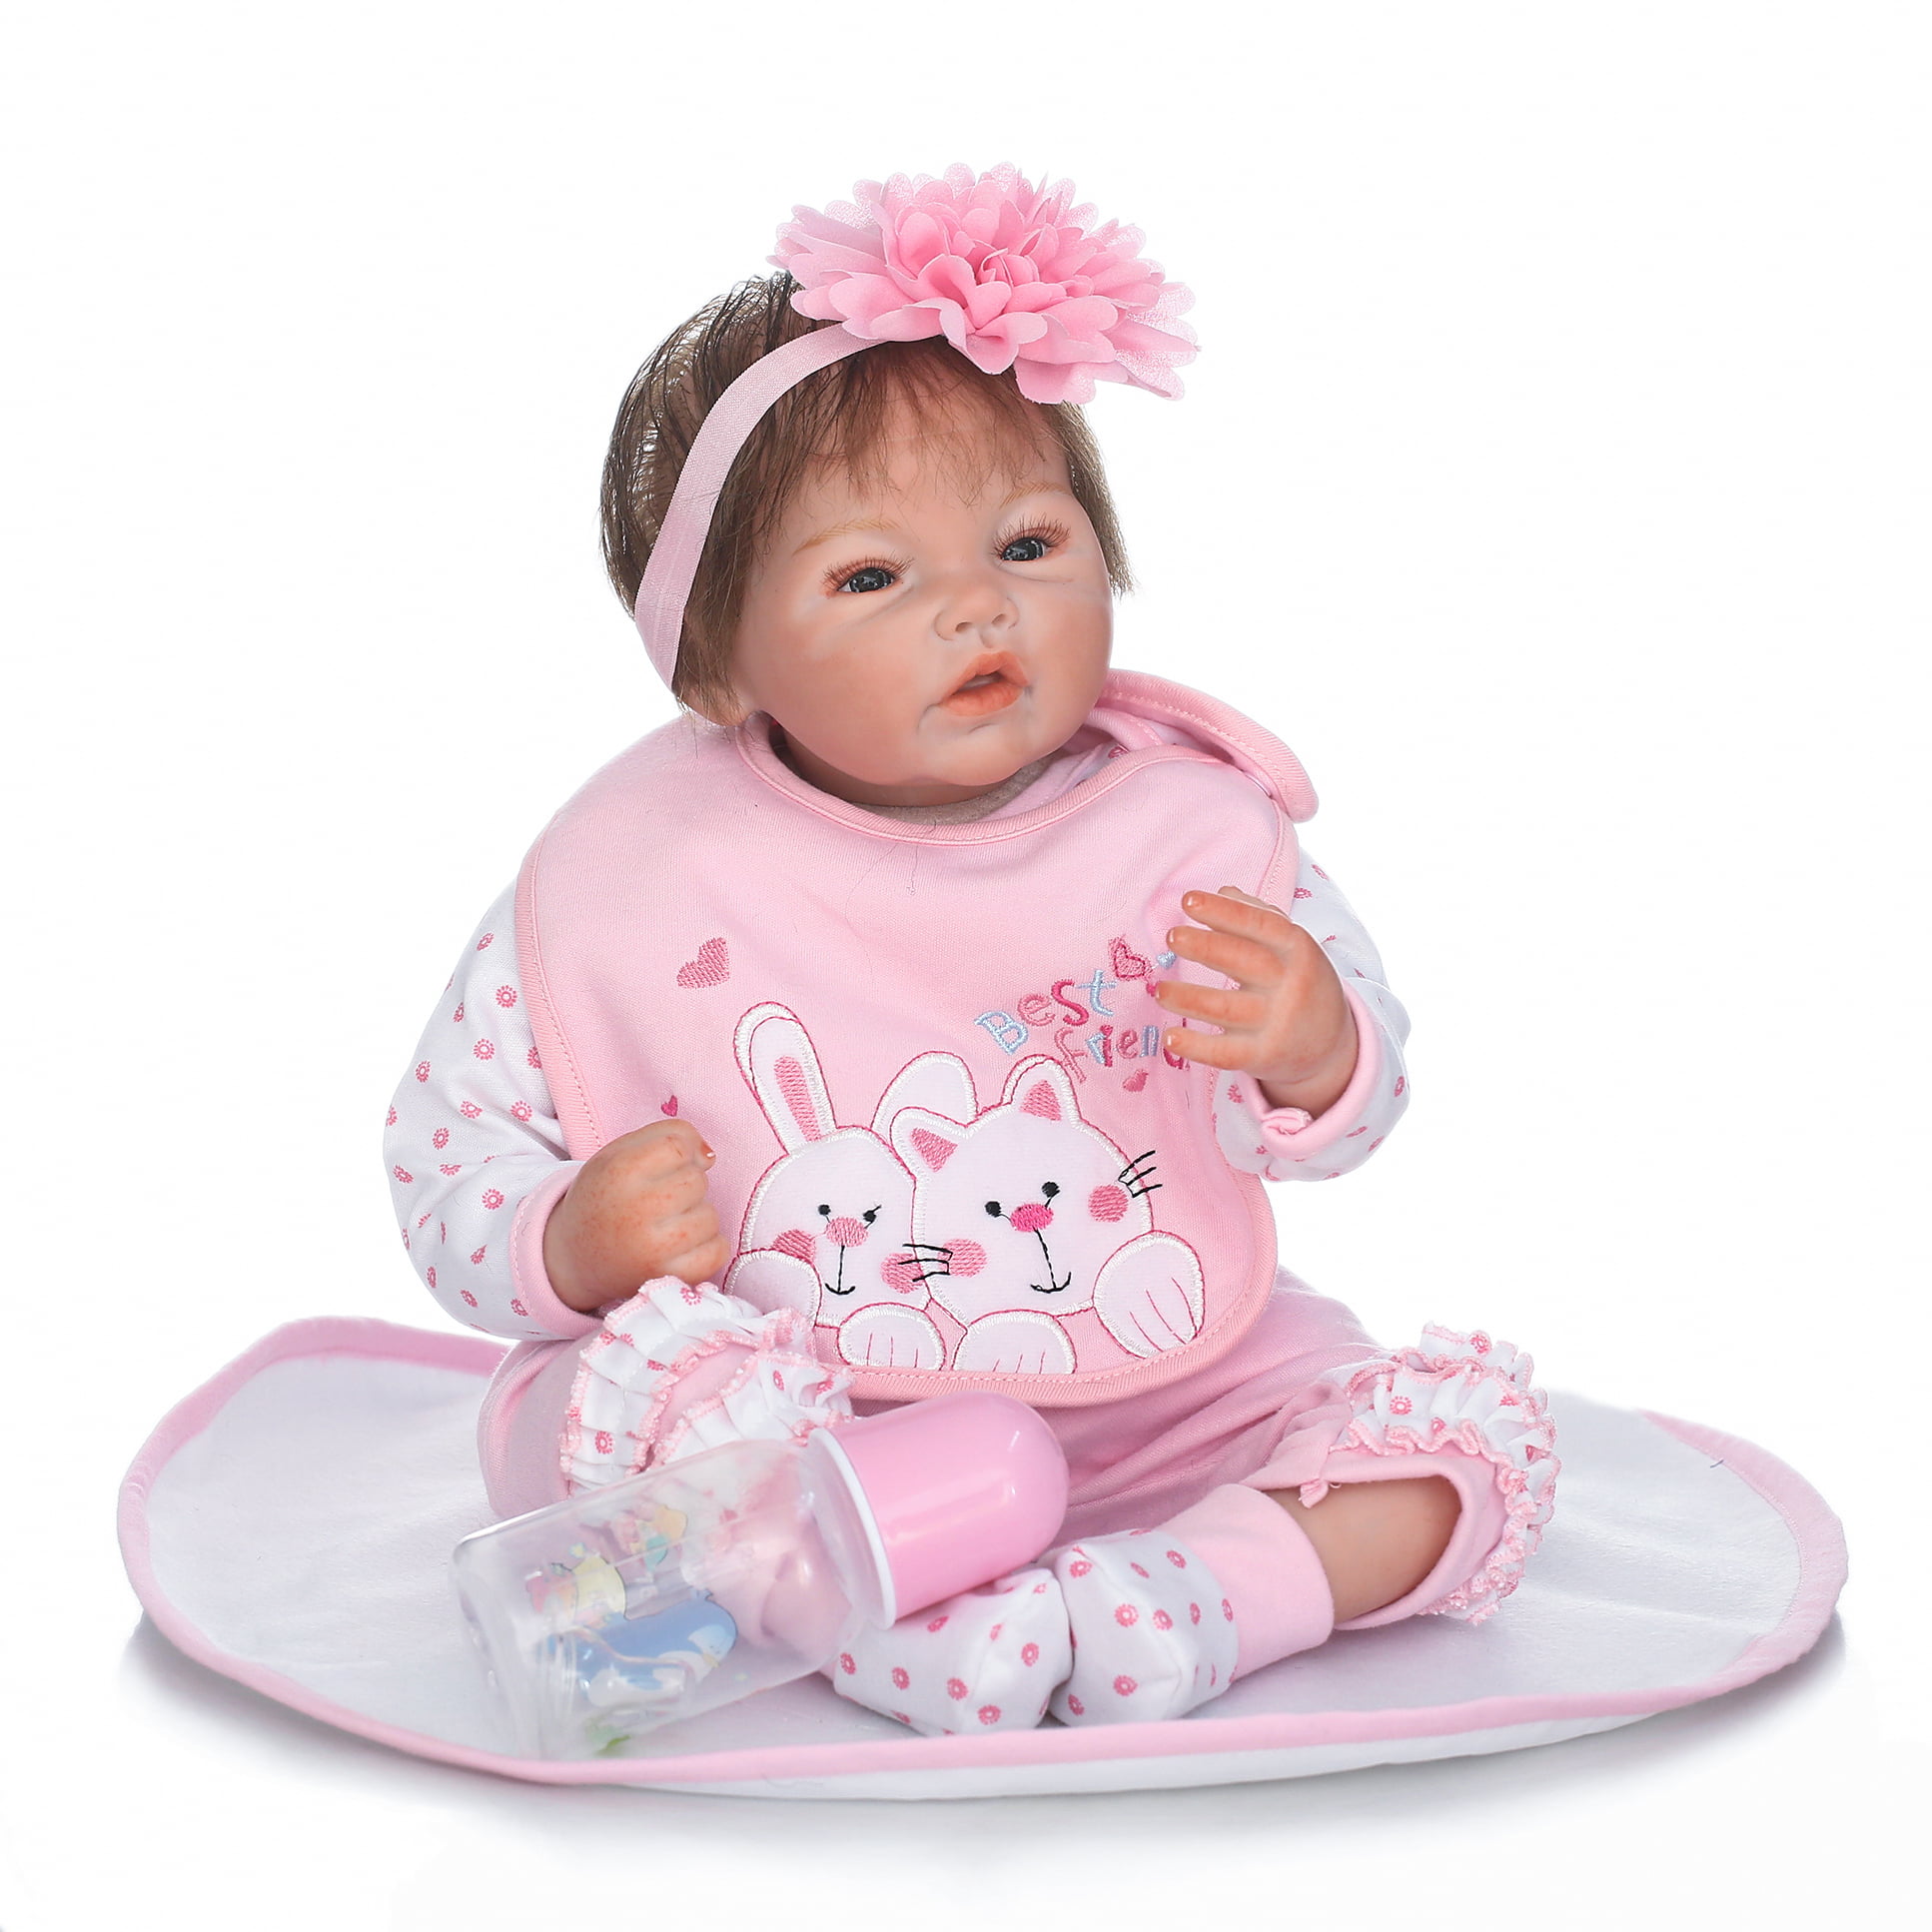 NPK Collection Reborn Soft Silicone Real Baby Doll 22inch 55cm Magnetic Mouth Lifelike Newborn Kids Doll Pink Dress Children's Day Valentine's Day Present